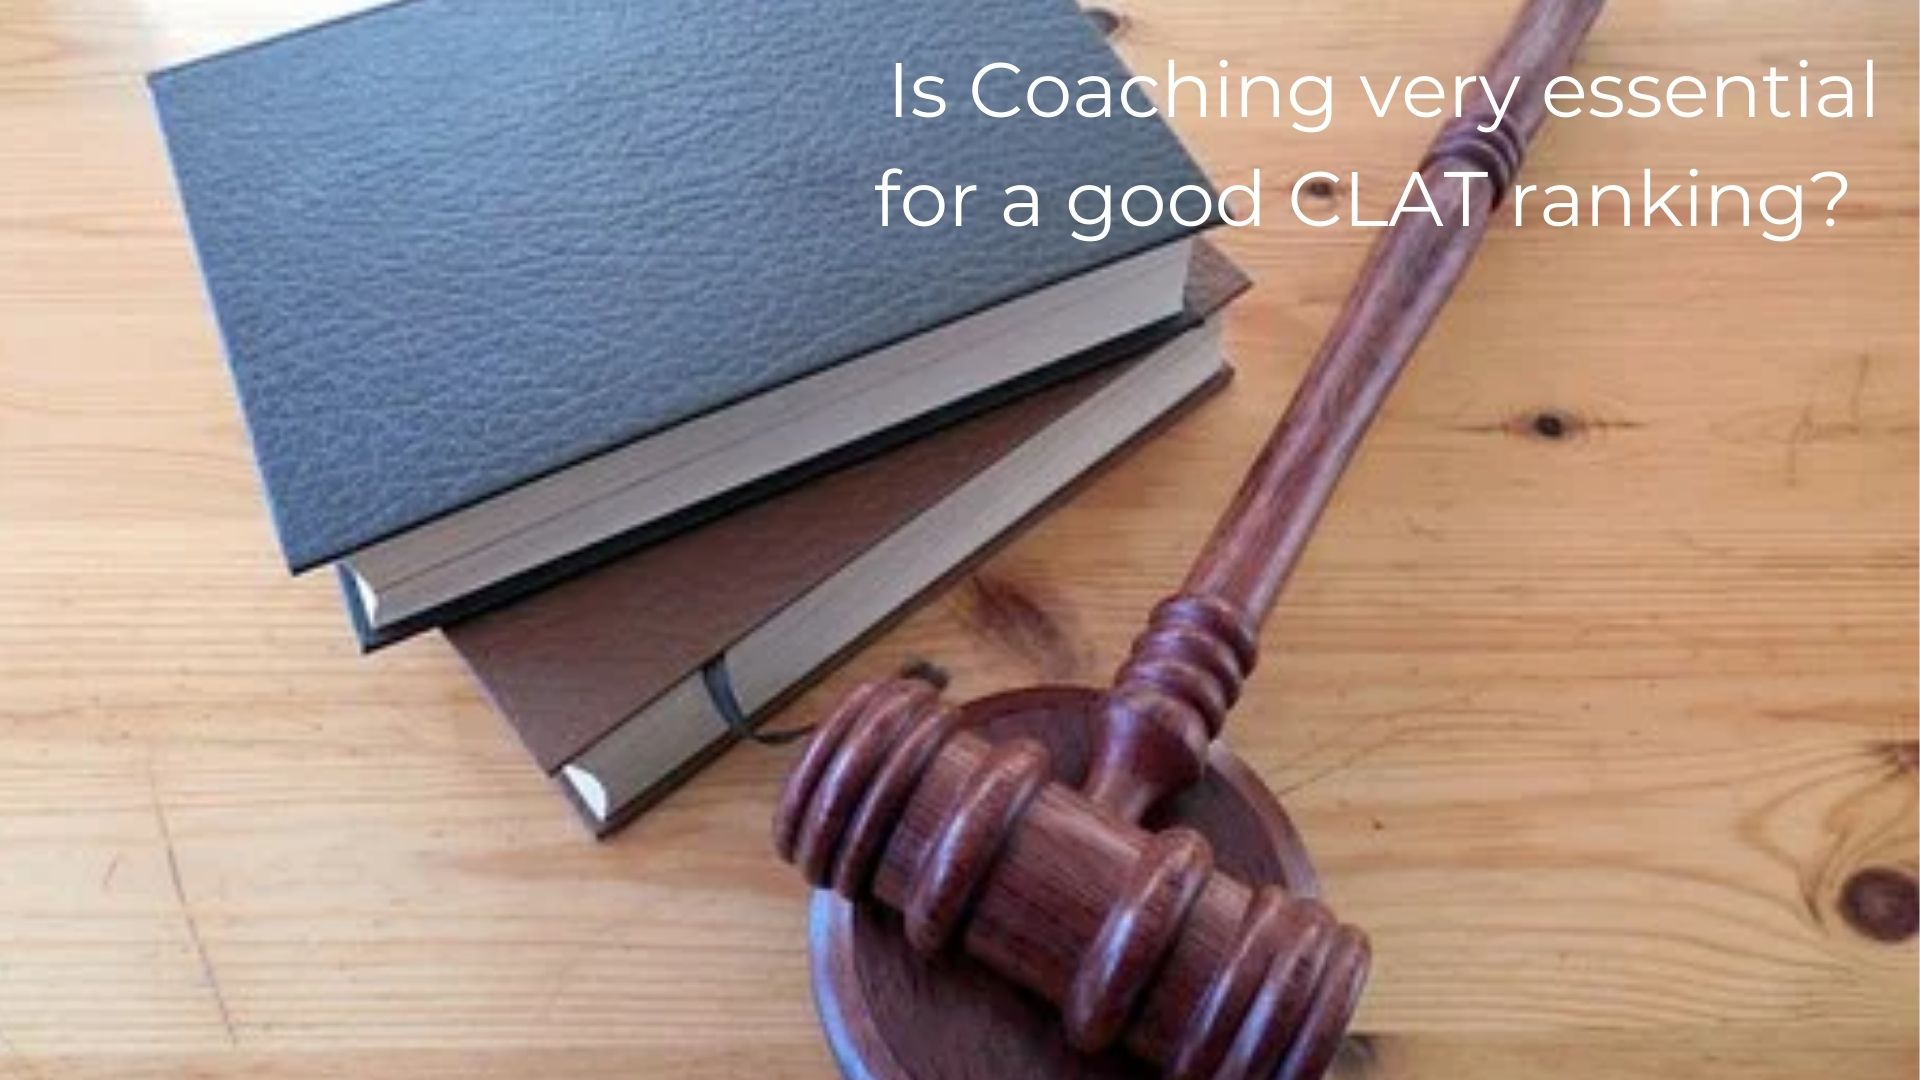 Is classroom or online coaching very essential for a good CLAT ranking